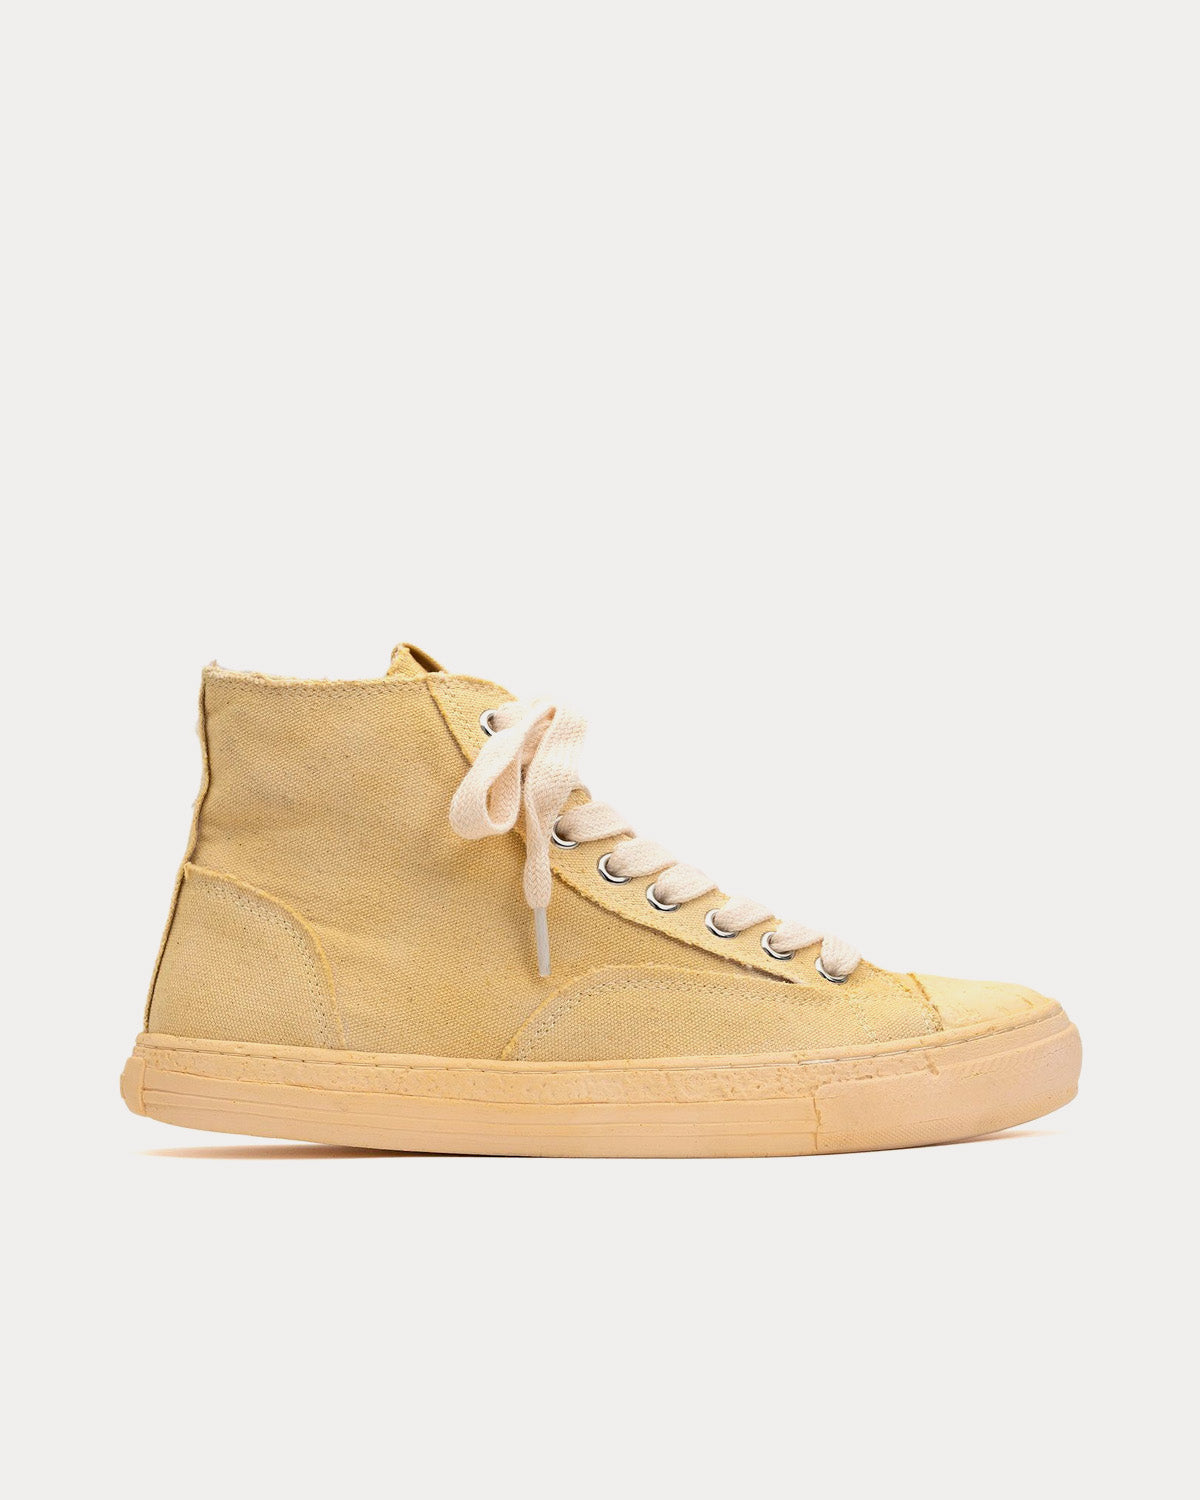 General Scale By Maison Mihara Yasuhiro - Past Sole Overdyed Canvas Beige High Top Sneakers